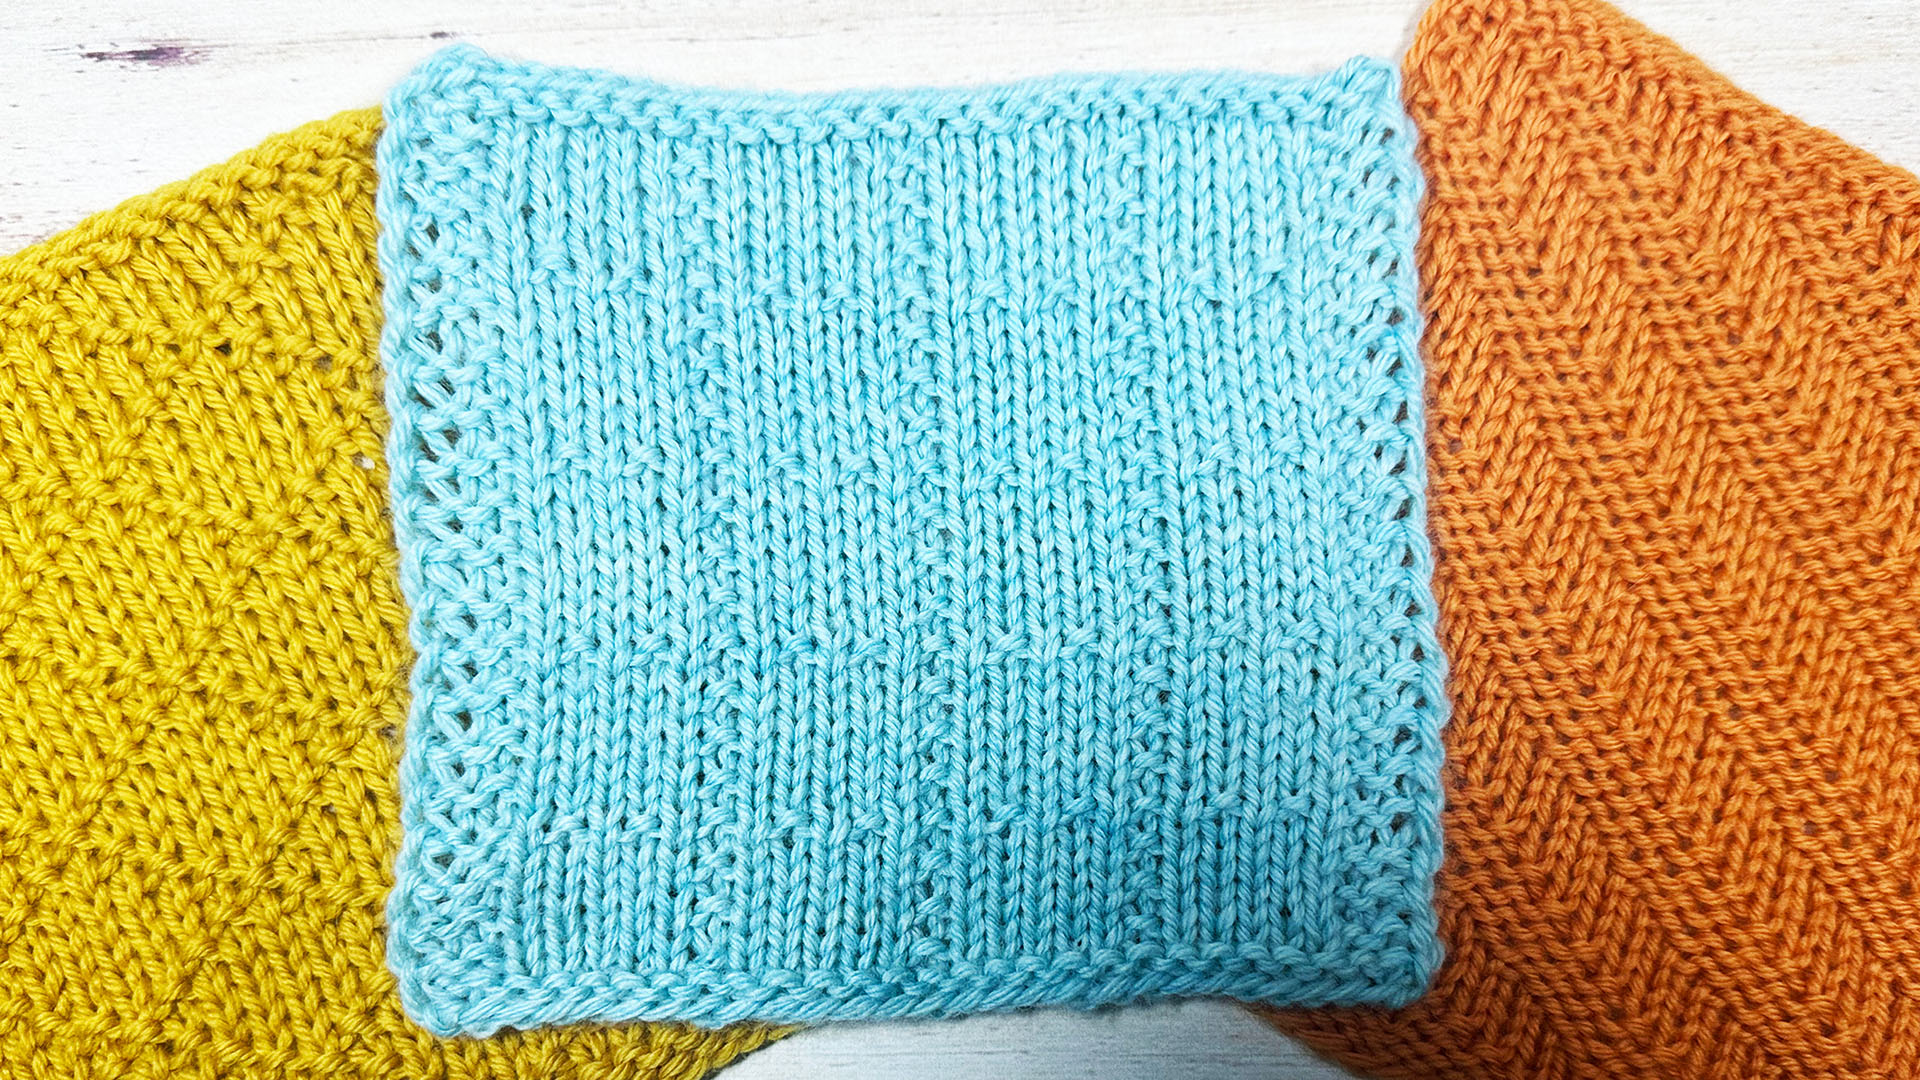 Free Knitting Pattern - 3 Textured Stitch Patterns for Blankets